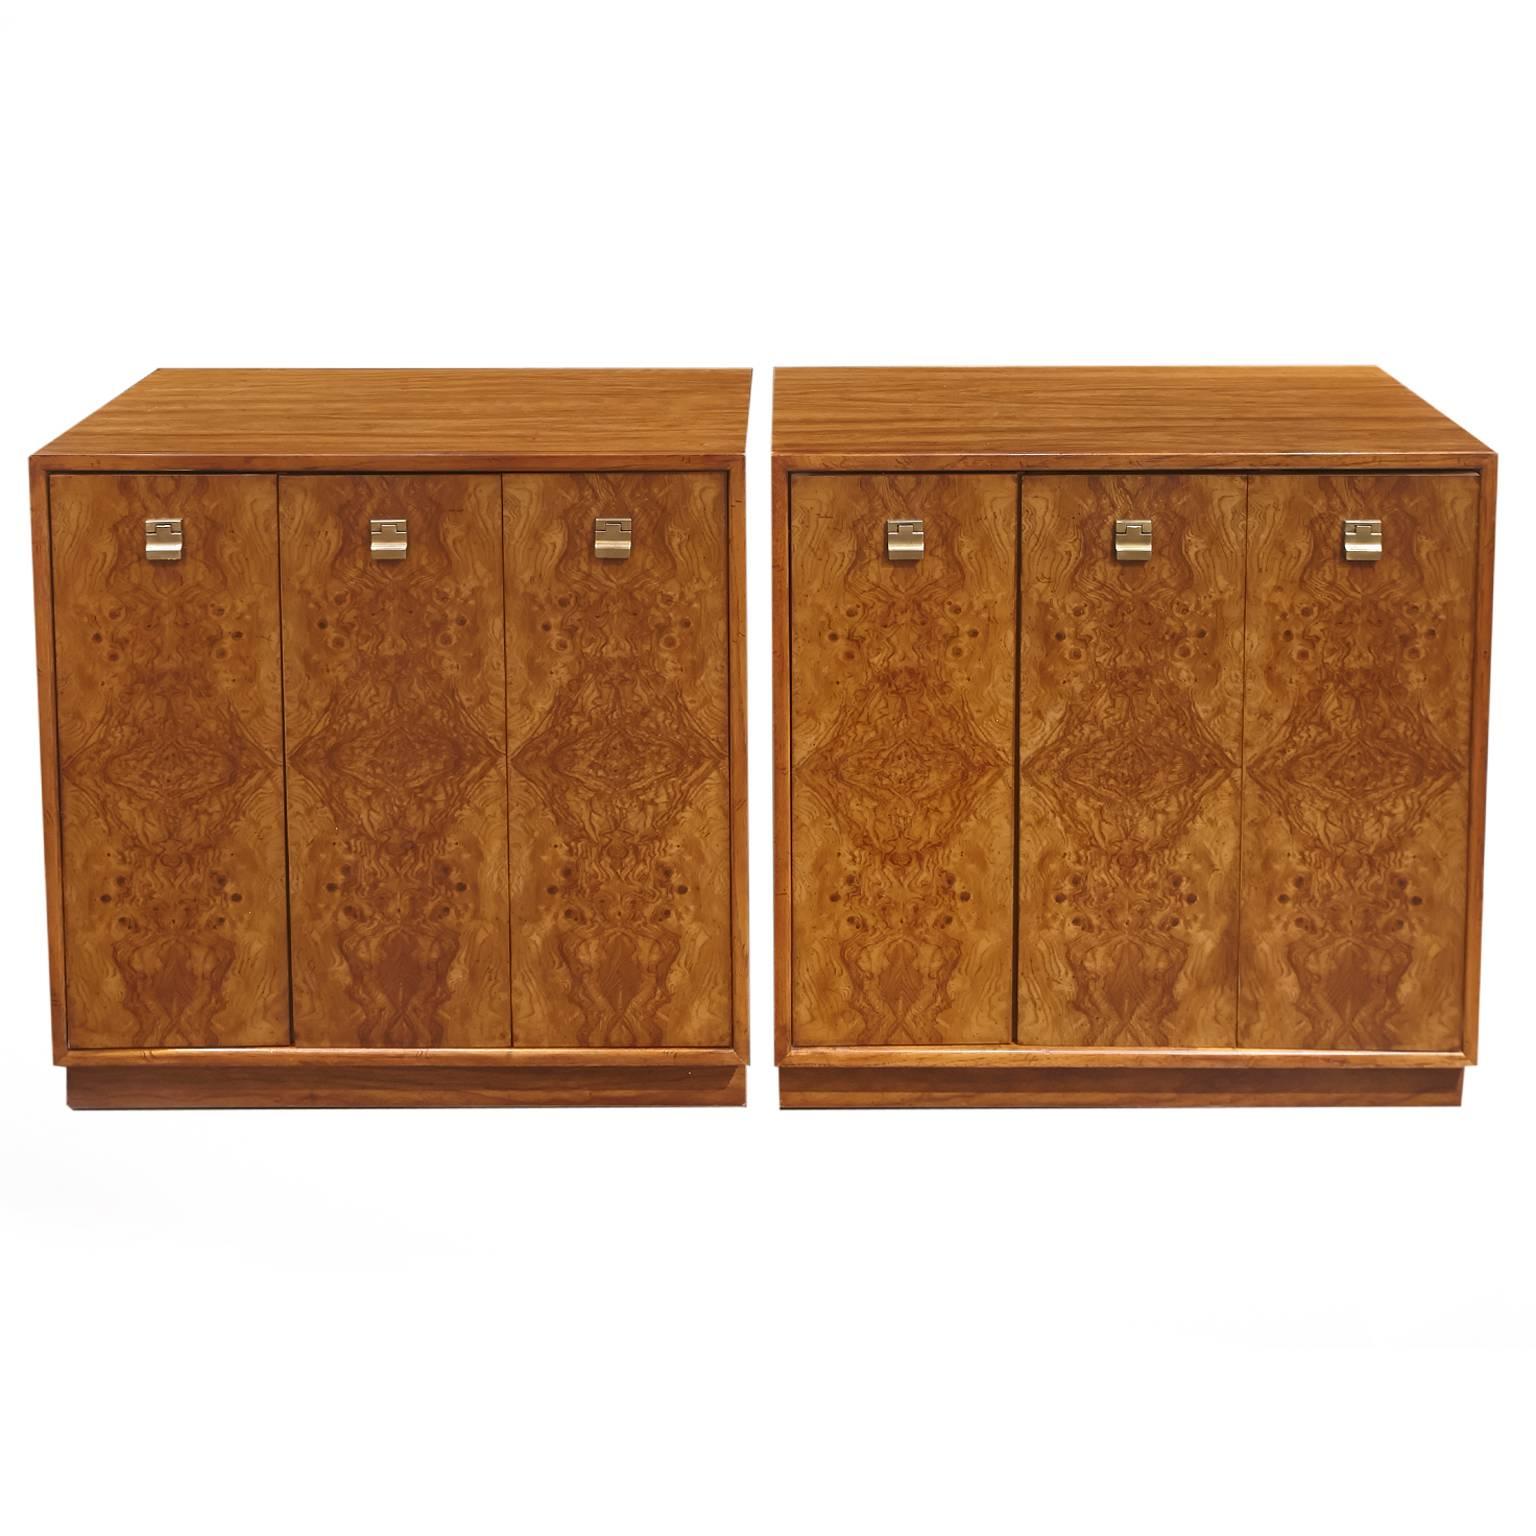 Pair of Edward Wormley Burl Wood Cabinets for Drexel Precedent